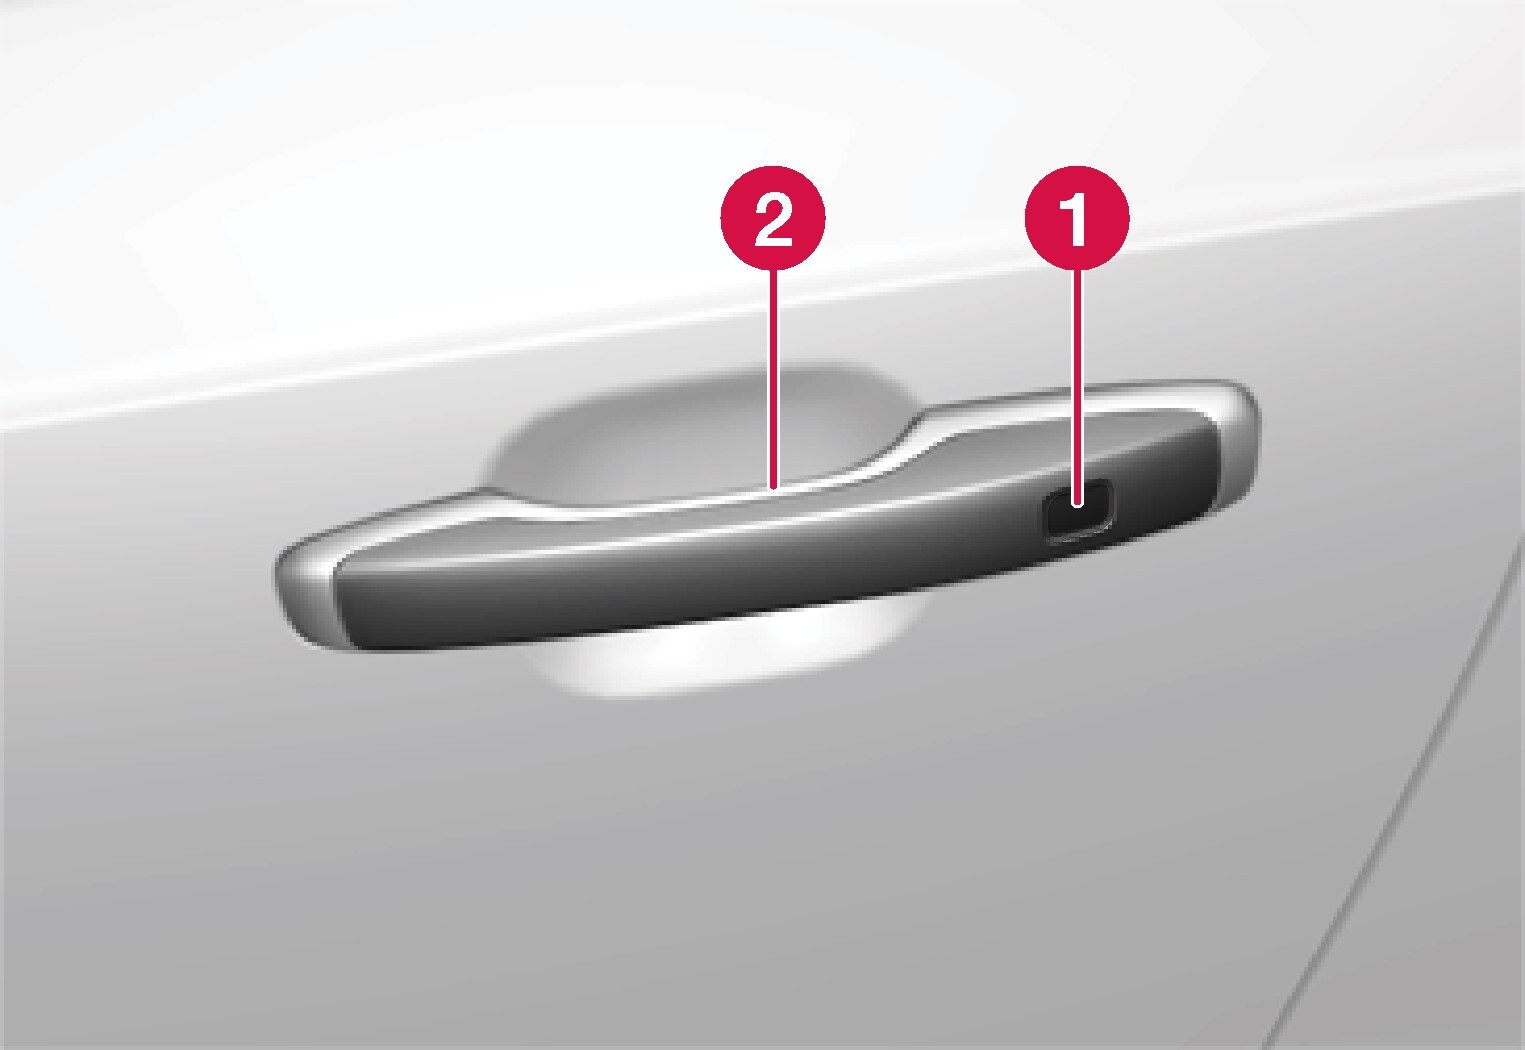 Recess on outside of door handles for locking. Touch-sensitive surface on the inside for unlocking.